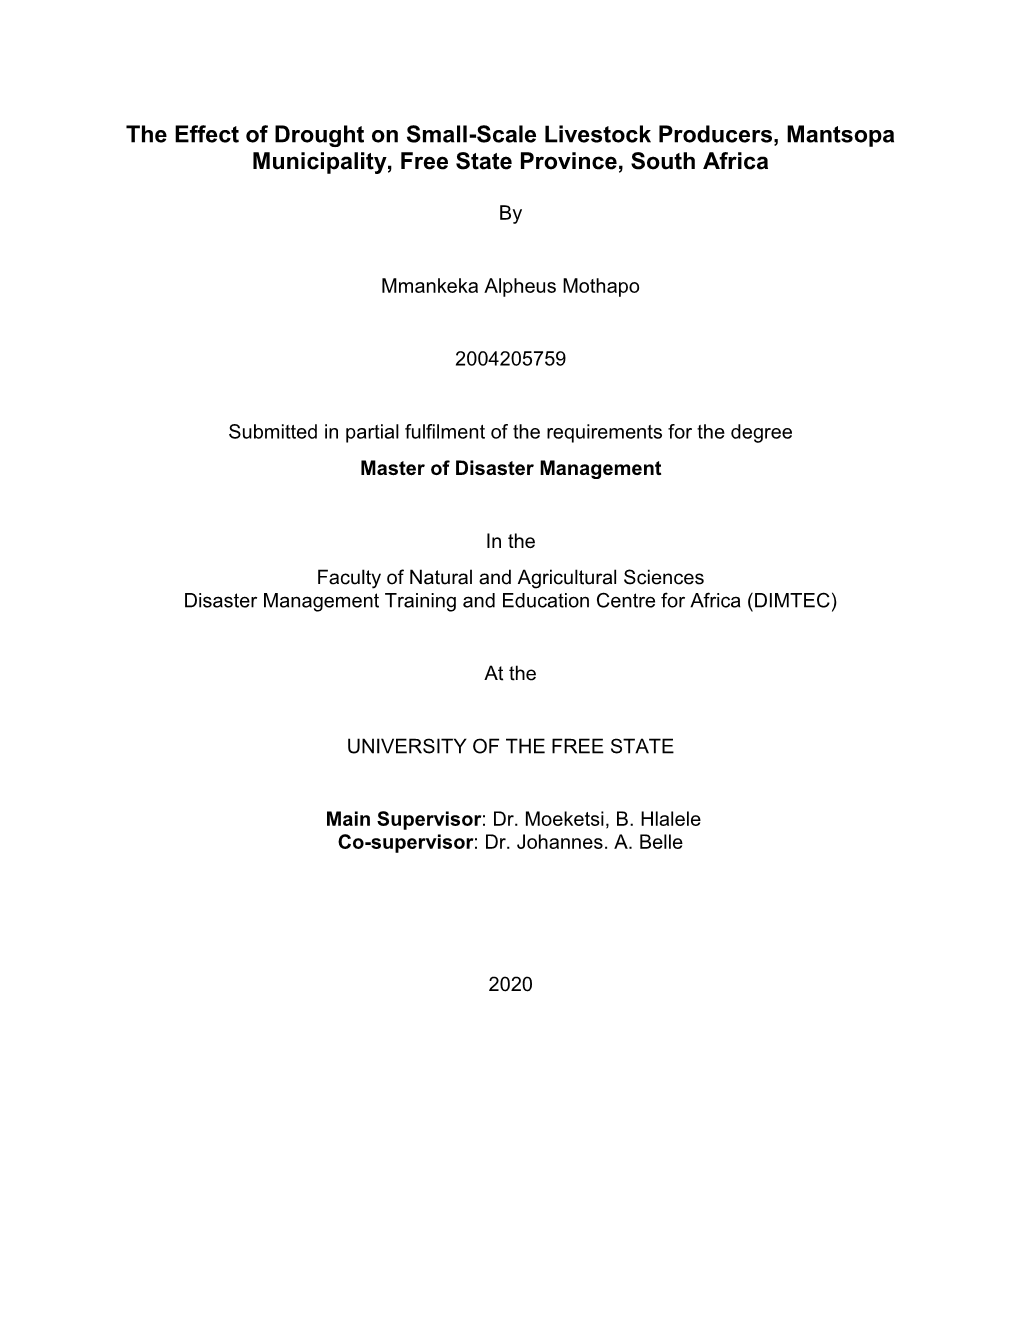 The Effect of Drought on Small-Scale Livestock Producers, Mantsopa Municipality, Free State Province, South Africa